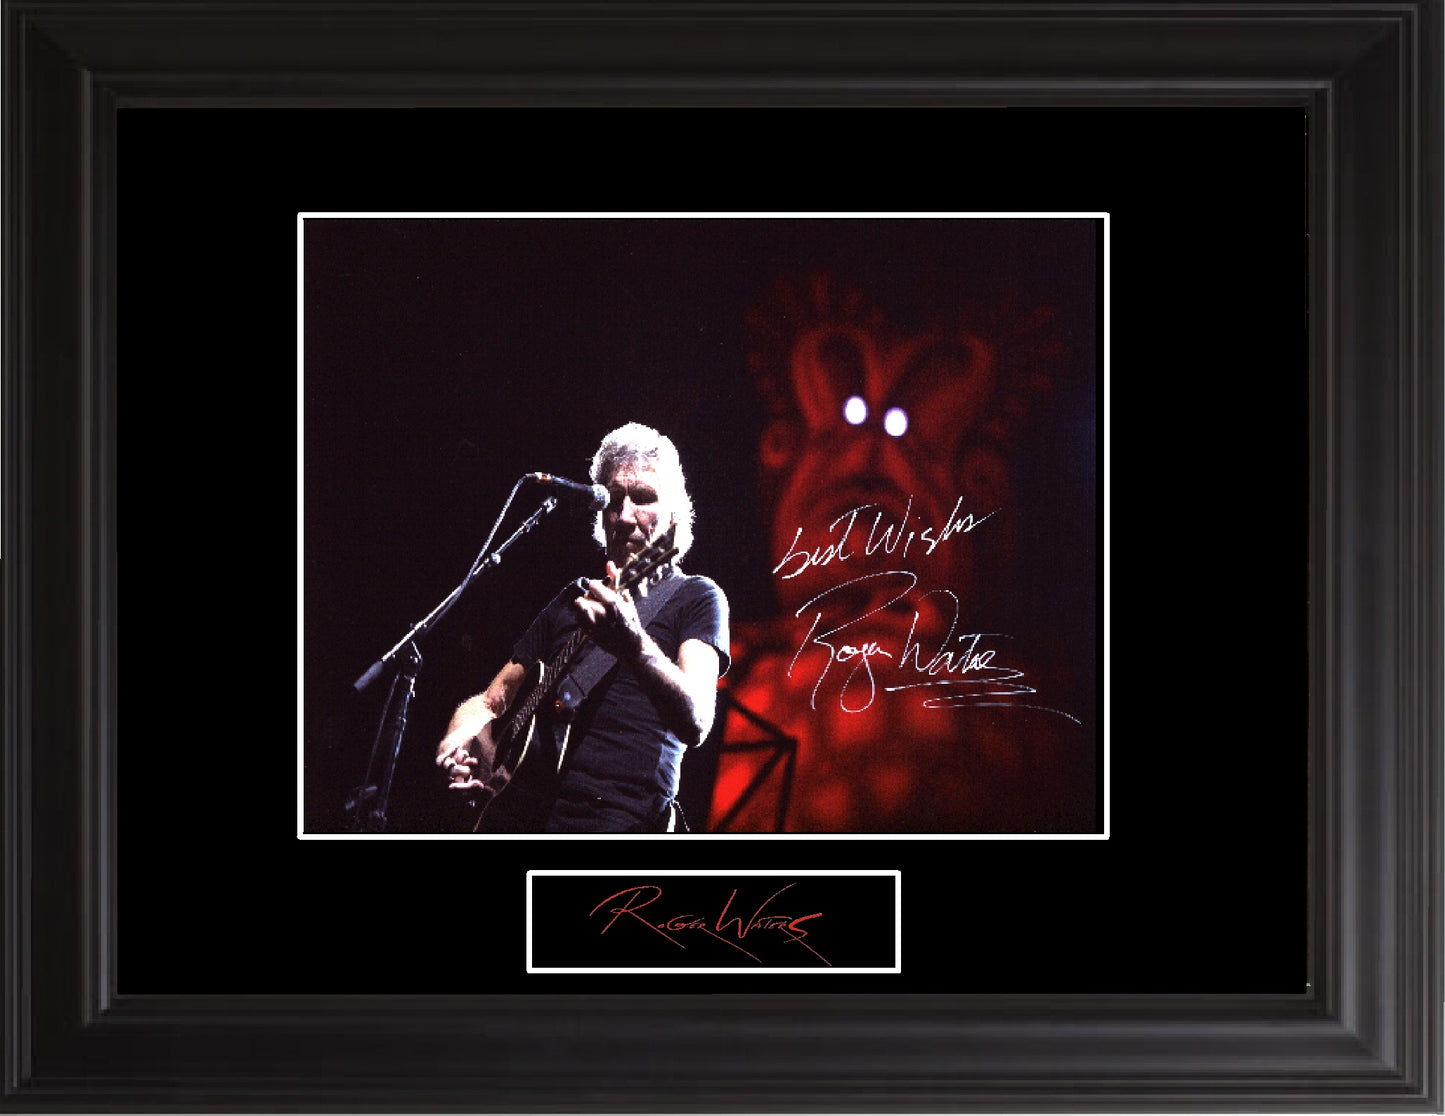 Roger Waters Signed Photo - Zion Graphic Collectibles